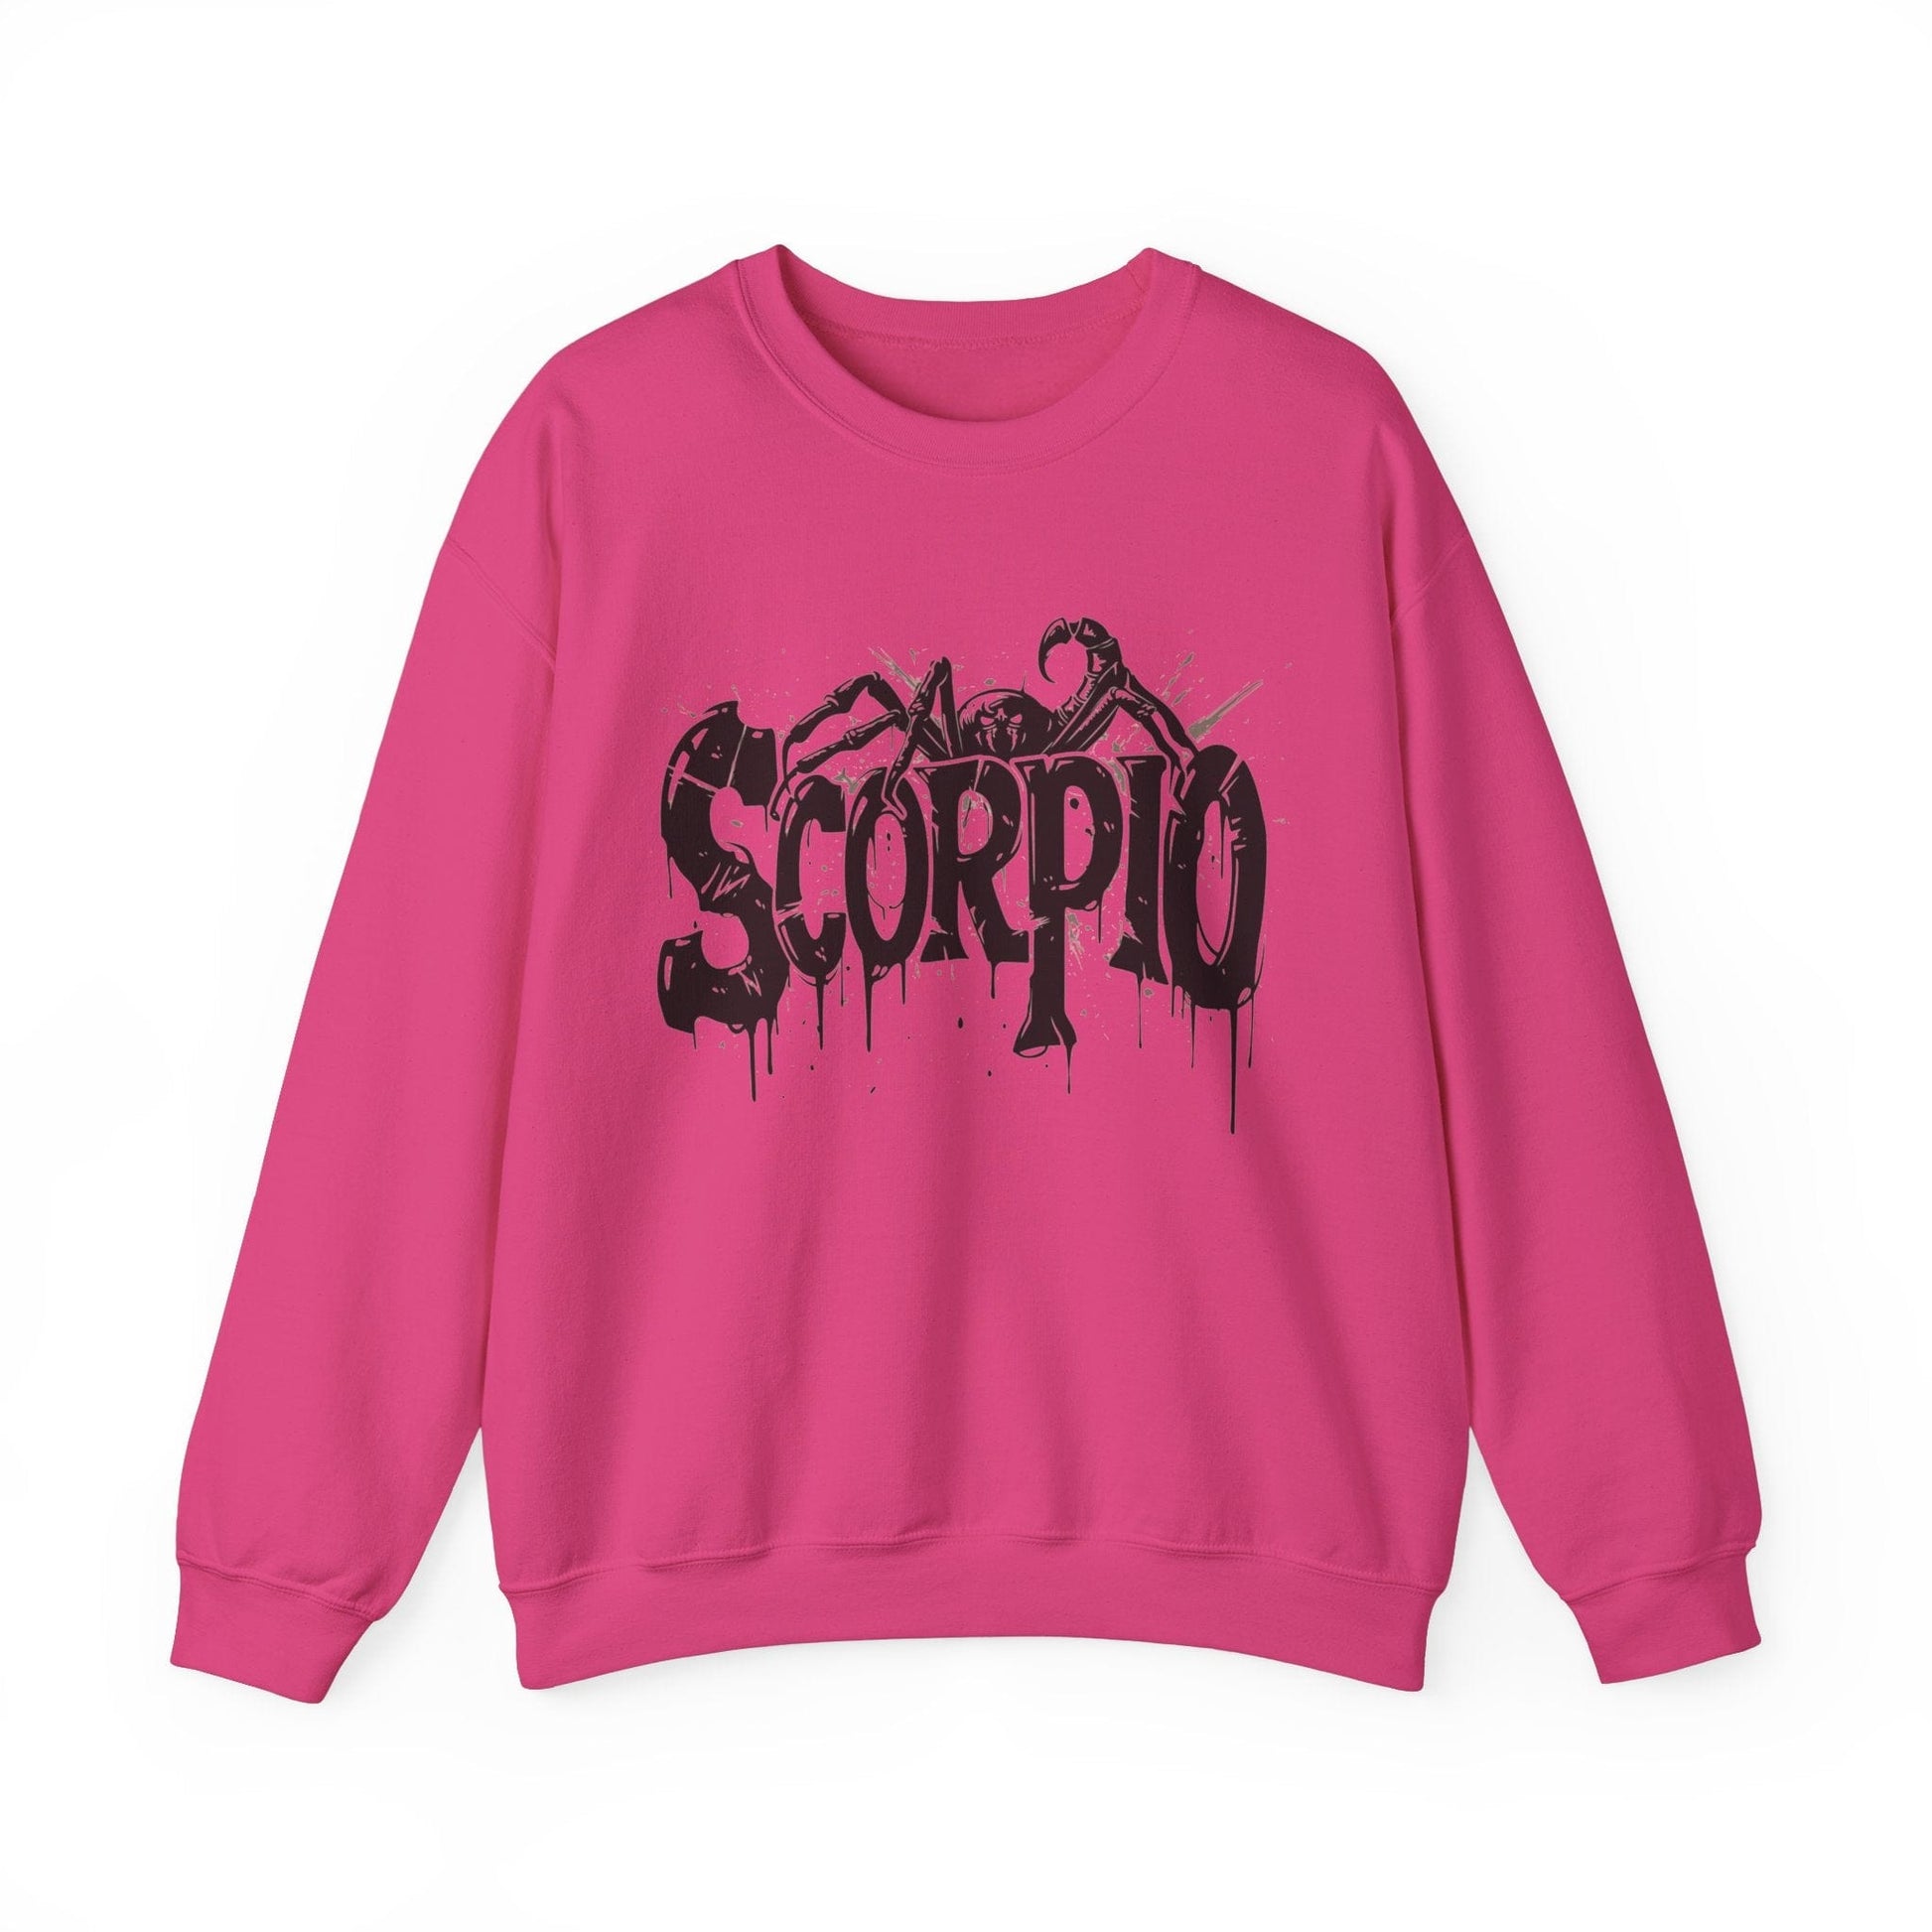 Sweatshirt S / Heliconia Sting of Mystery Scorpio Sweater: Embrace the Darkness